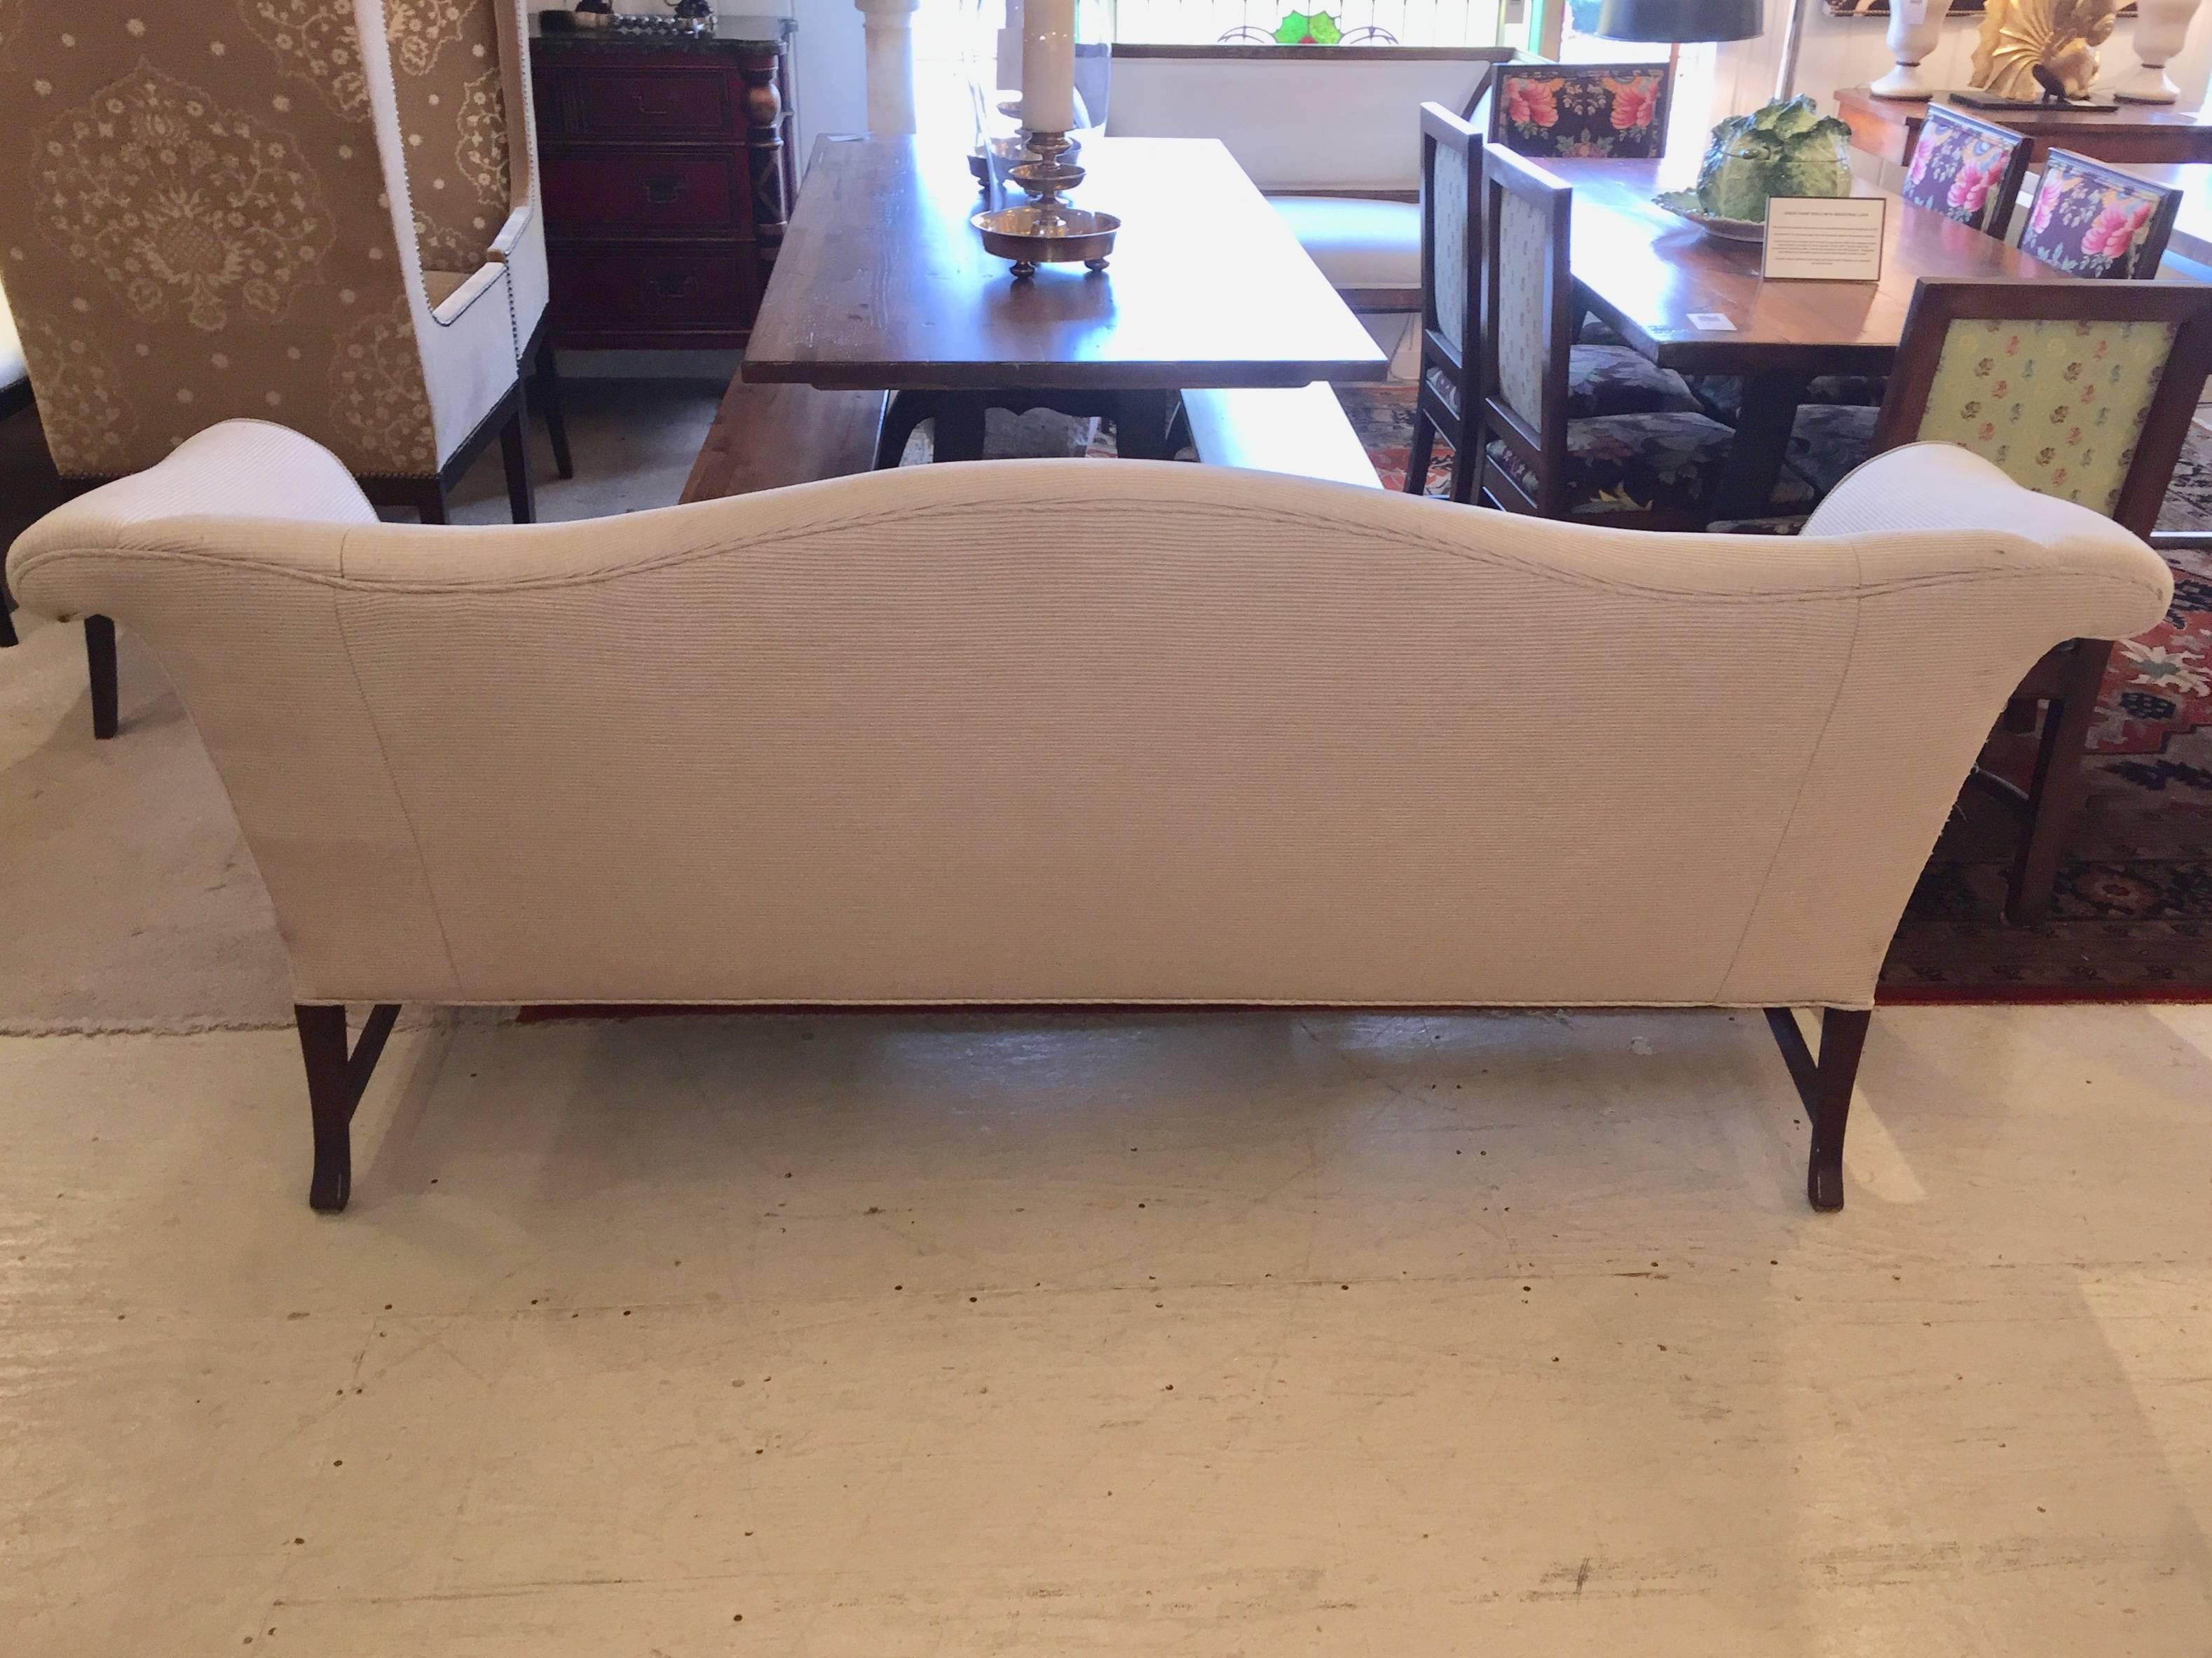 Wonderfully shaped classic camel back sofa having mahogany legs and stretcher, upholstered in a neutral taupe fabric. Back of sofa has some pulls, so best if it will be used against a wall or otherwise reupholstered.
Measures: Seat depth 19”.